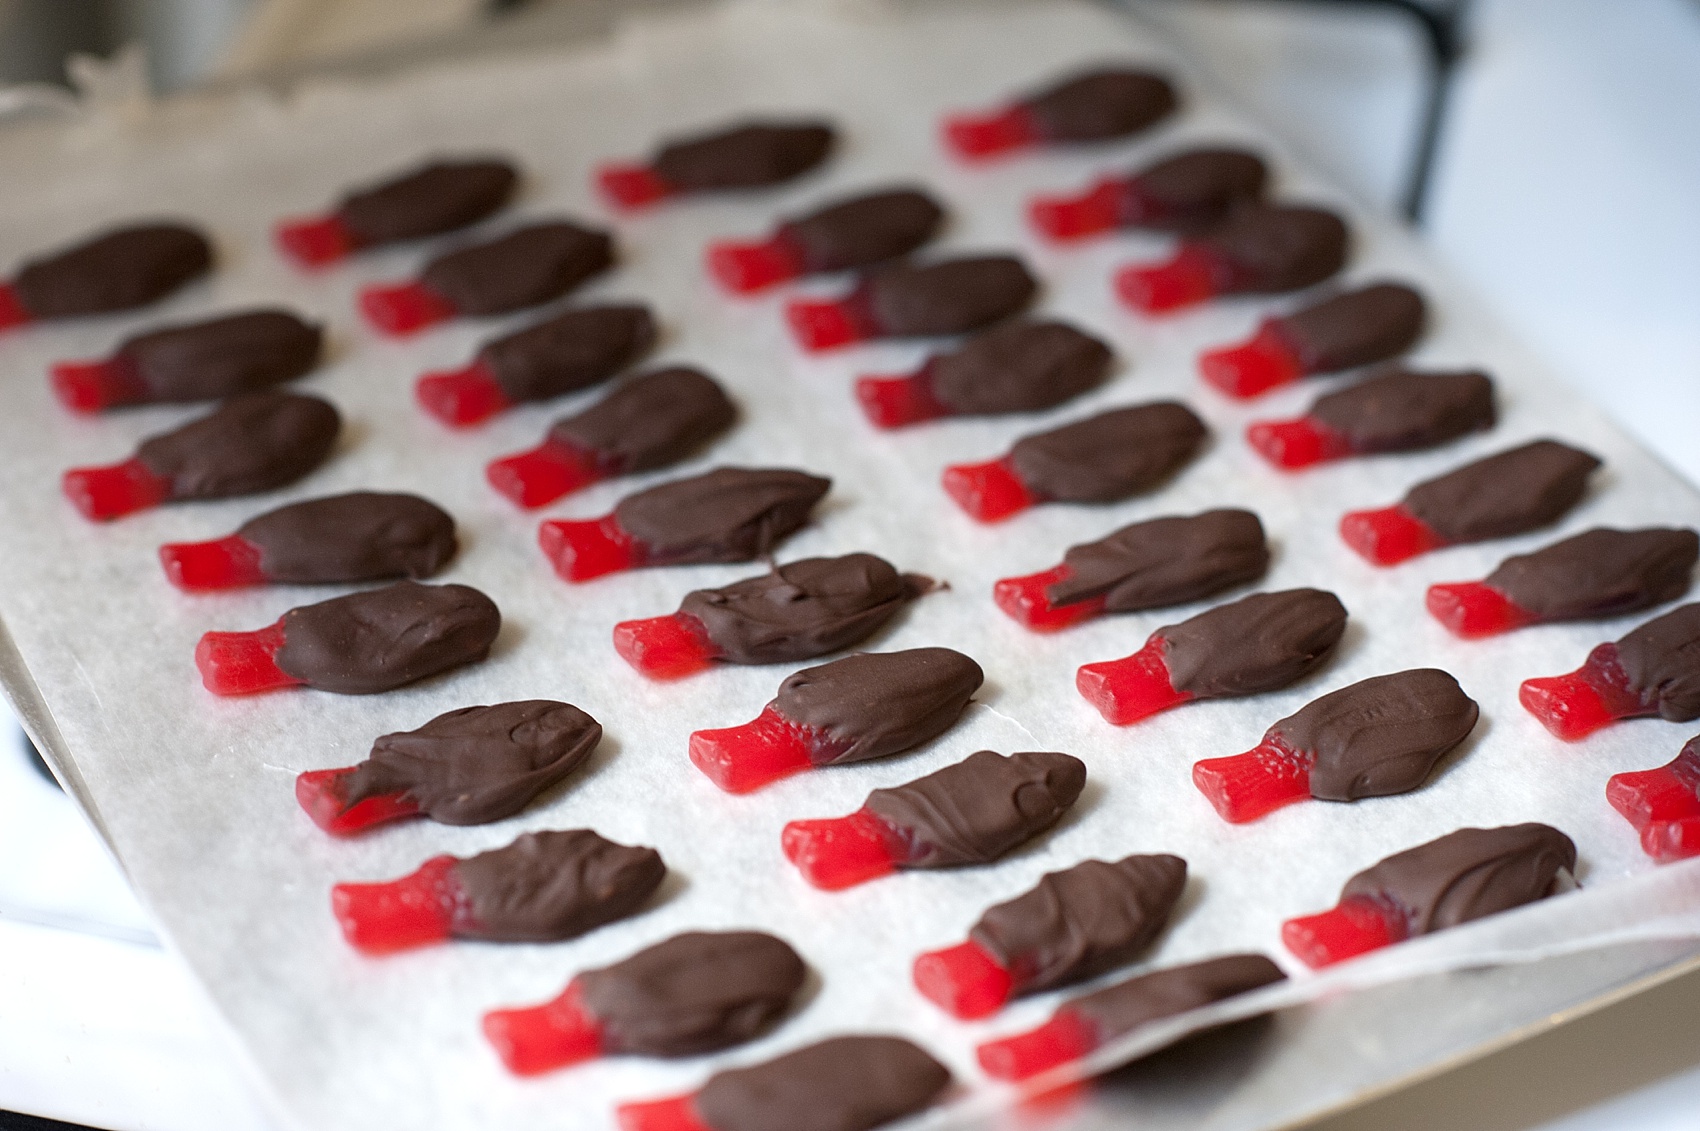 Chocolate Covered Swedish Fish! DIY candy and photos by Mikkel Paige Photography. #swedishfish #chocolatecovered #candy